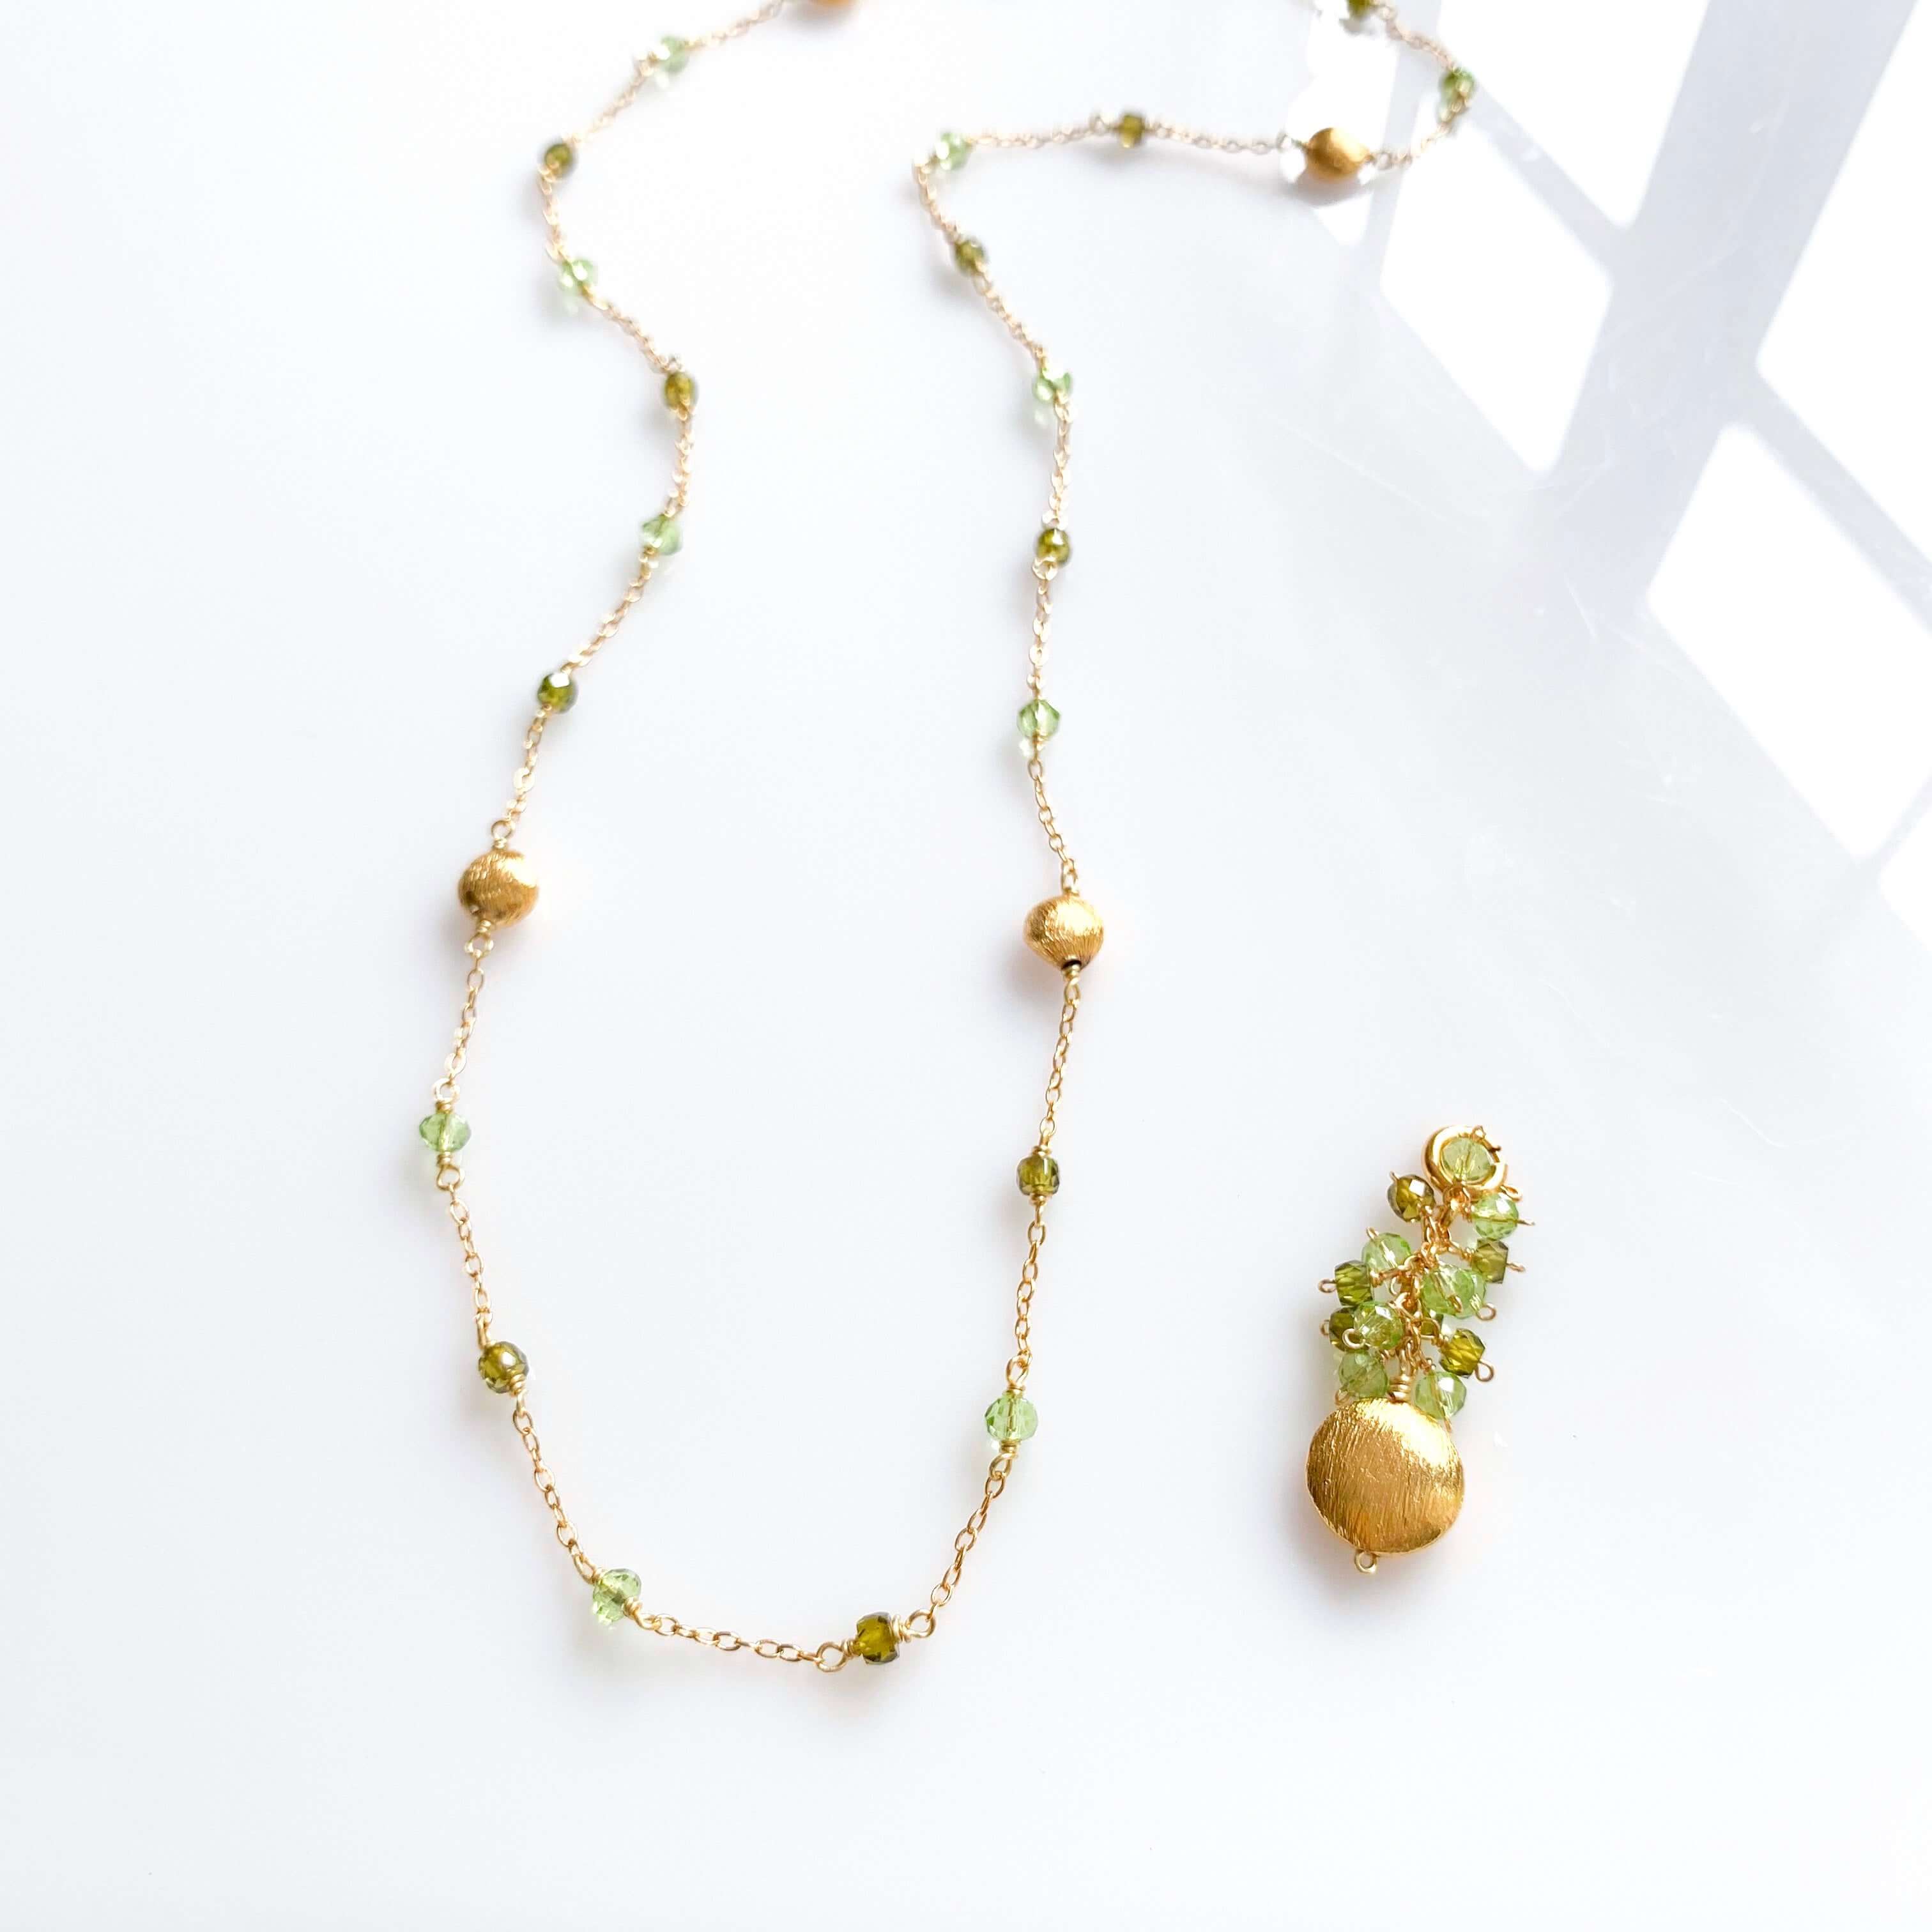 Convertible Gemstone Necklace with Peridot and Green Amethyst